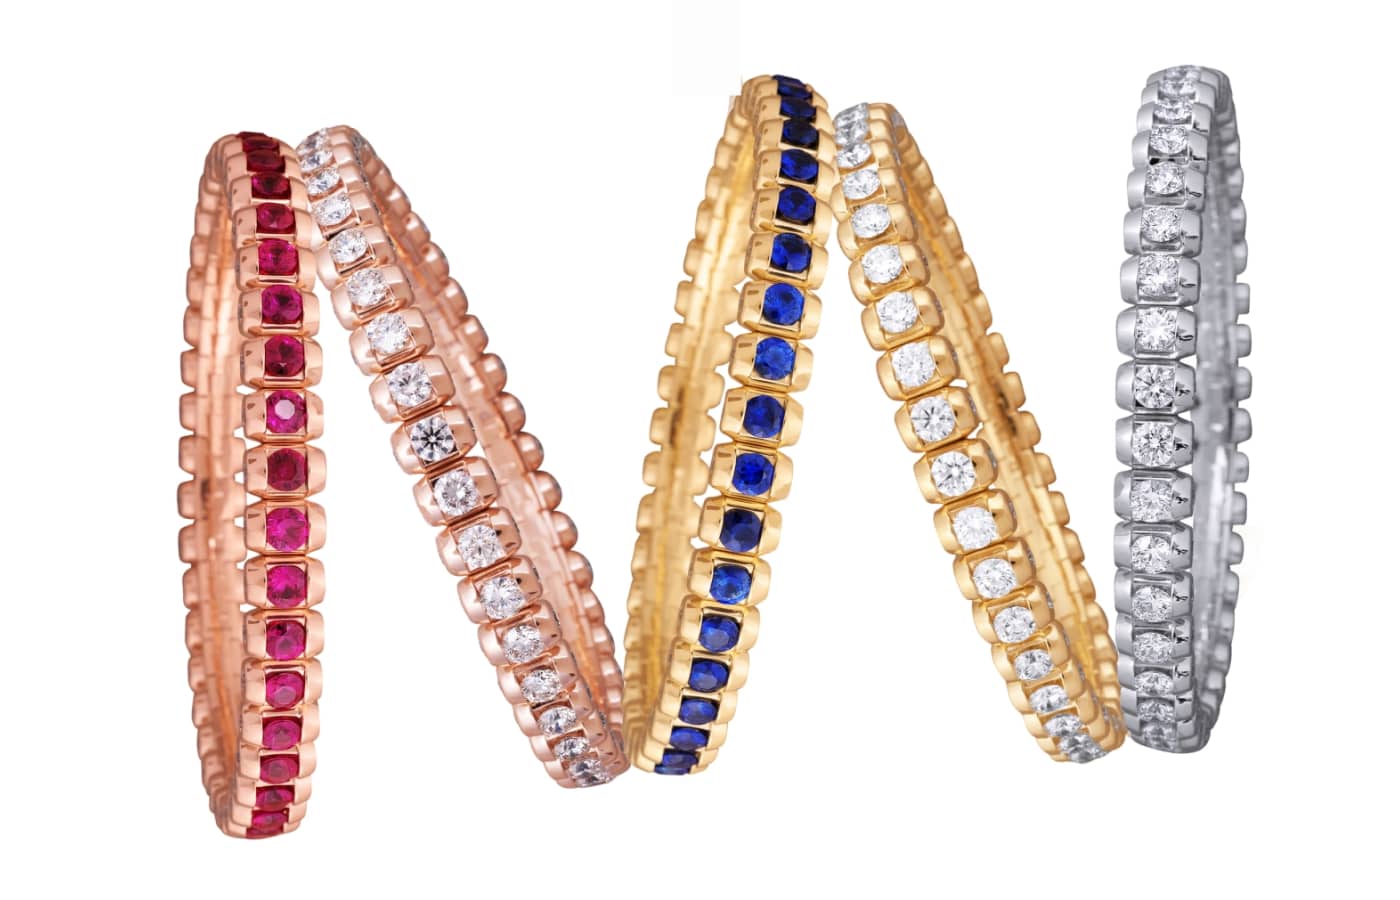 PICCHIOTTI Bullet Bracelets in gold, rose gold, white gold, sapphire, ruby and diamond